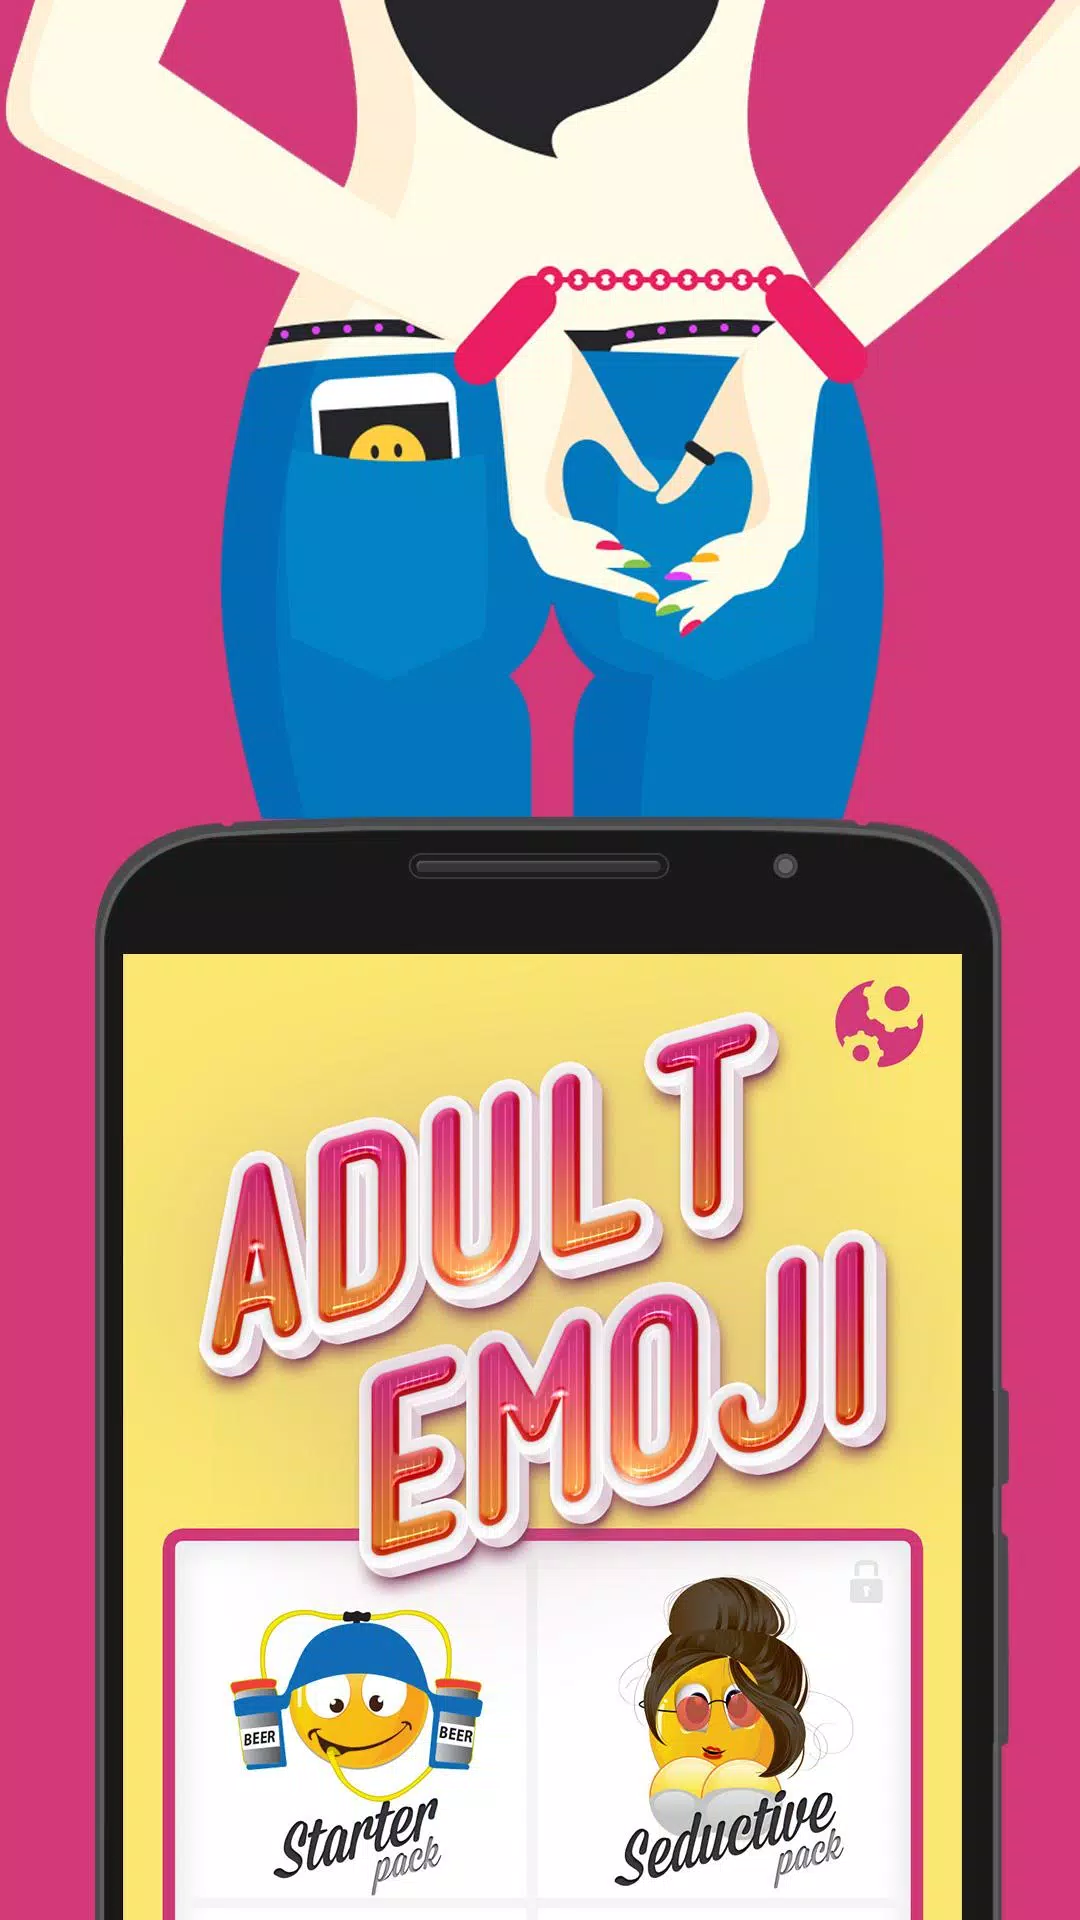 Adult XXX Emoji Sexy Emoticons for Android - APK Download